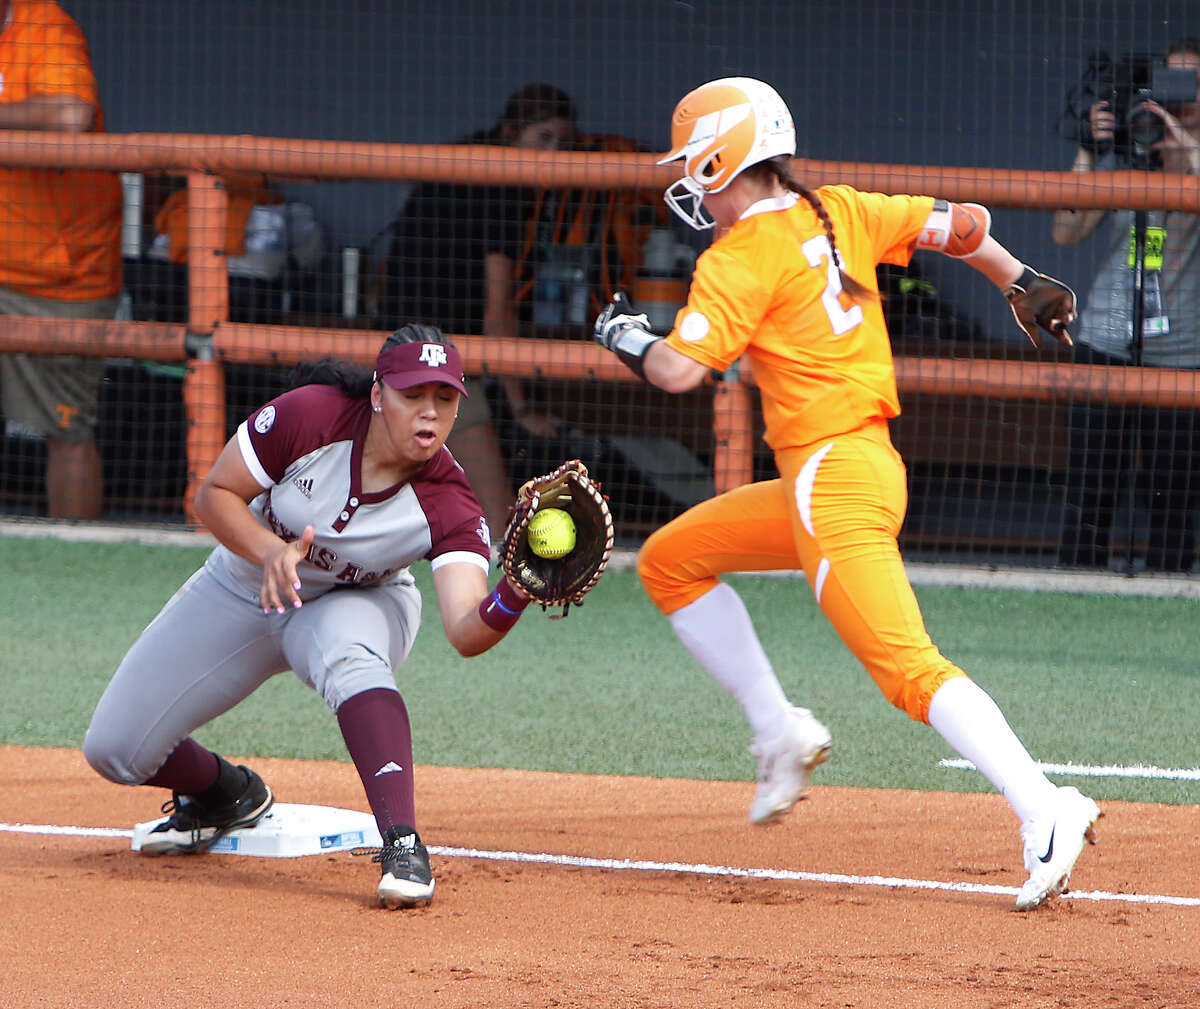 First baseman Tori Vidales, left, and A&M took a difficult route to the Women's College World Series - losing the first game of a super regional at Tennessee before beating the favored Volunteers in the next two.